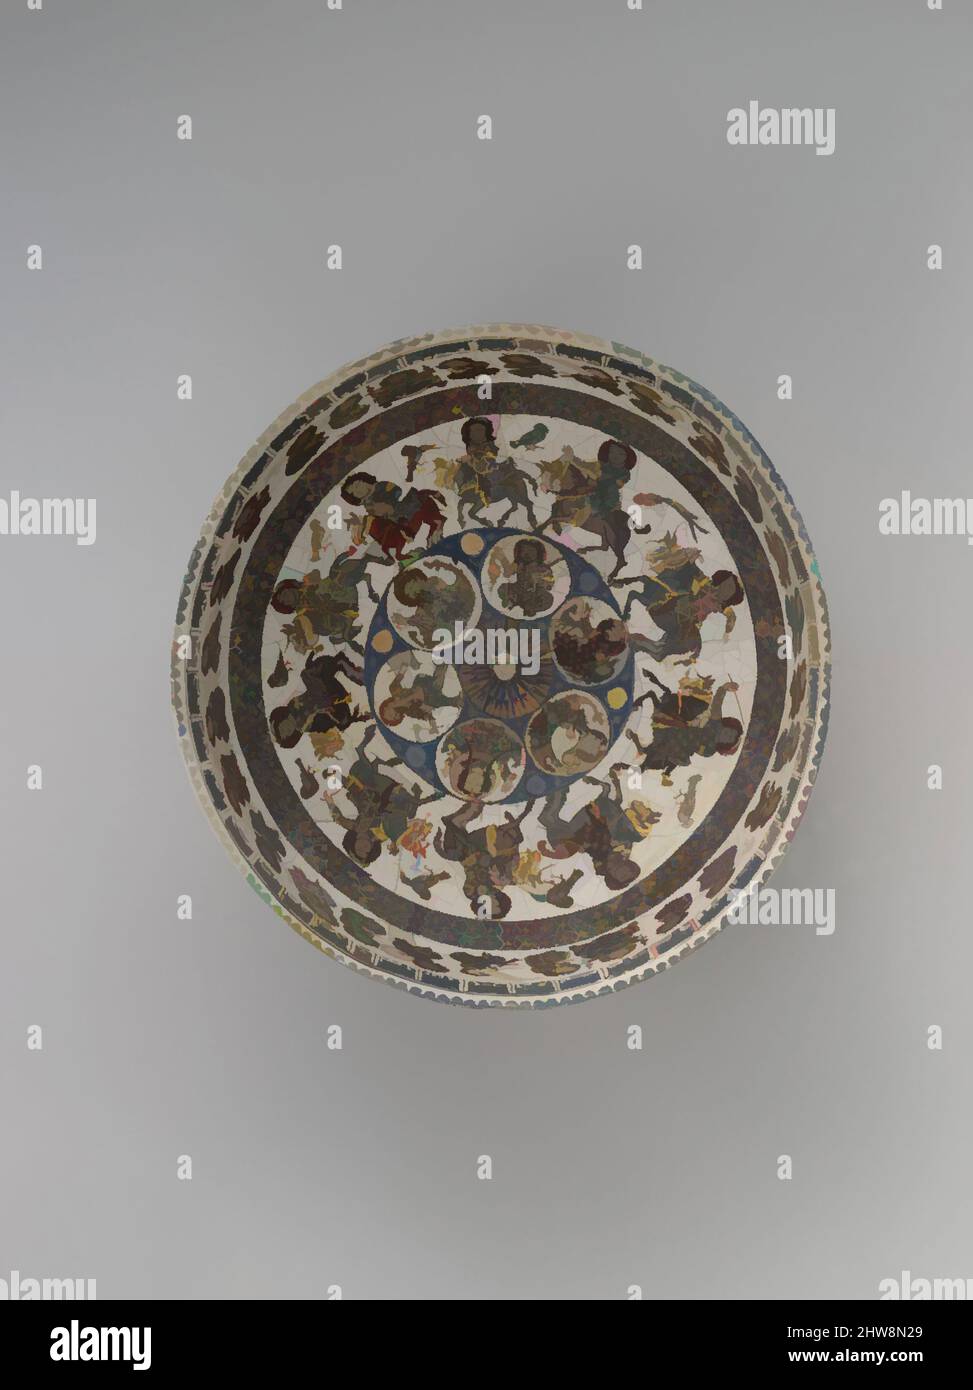 Art inspired by Bowl with Courtly and Astrological Motifs, late 12th–early 13th century, Attributed to Central or Northern Iran, Stonepaste; polychrome inglaze and overglaze painted and gilded on opaque monochrome glaze (mina'i), H. 3 3/4 in. (9.5 cm), Ceramics, The figures and, Classic works modernized by Artotop with a splash of modernity. Shapes, color and value, eye-catching visual impact on art. Emotions through freedom of artworks in a contemporary way. A timeless message pursuing a wildly creative new direction. Artists turning to the digital medium and creating the Artotop NFT Stock Photo